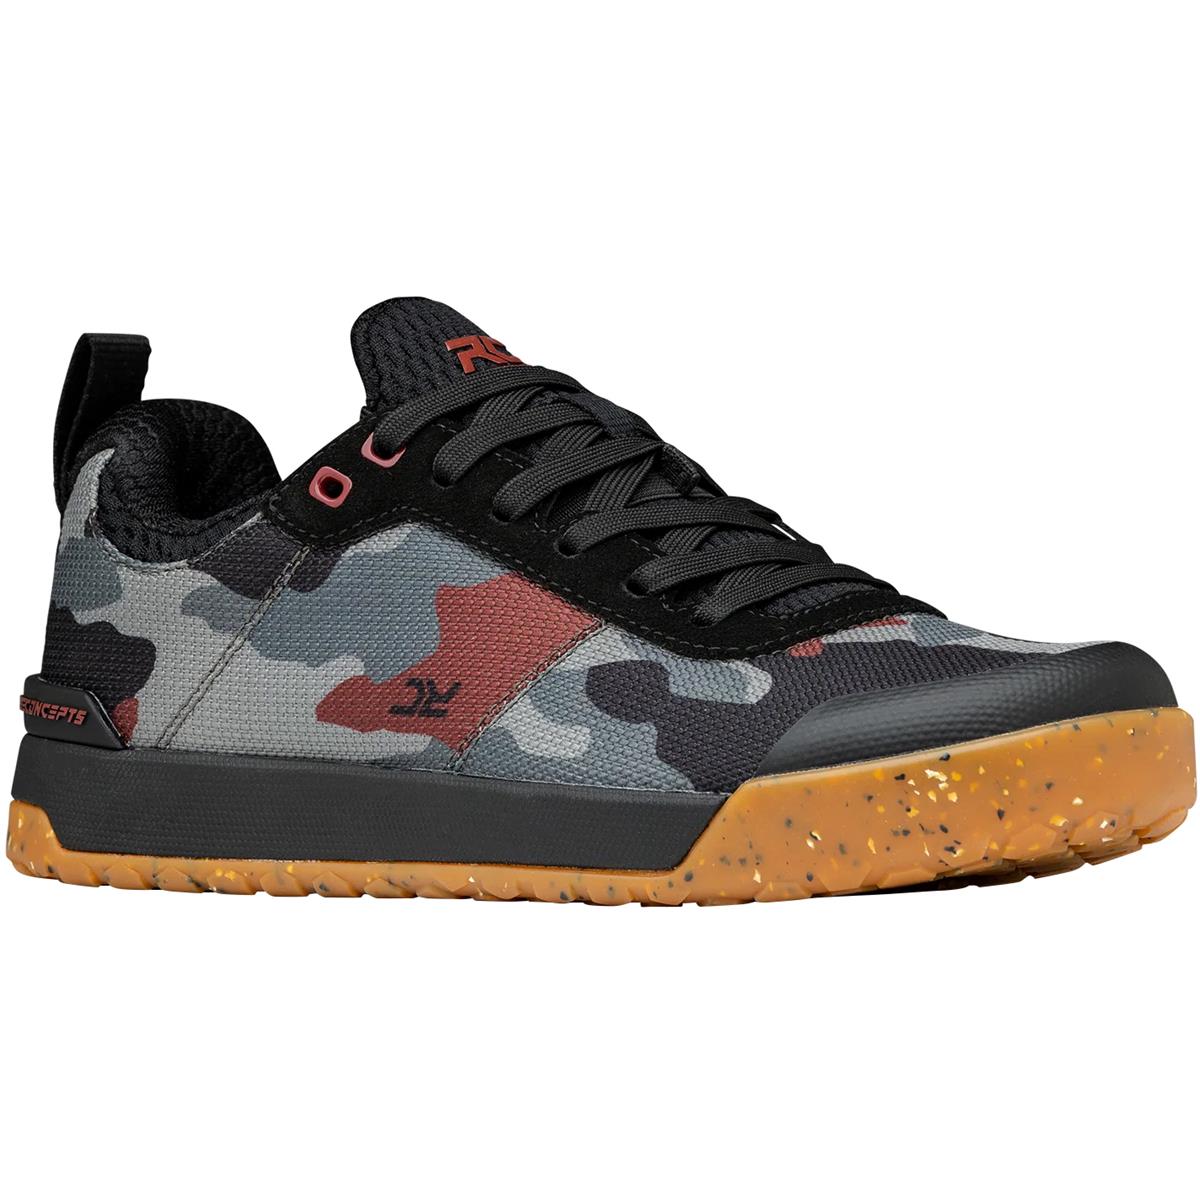 Ride Concepts Femme Chaussures VTT Accomplice Flat Rose Camo